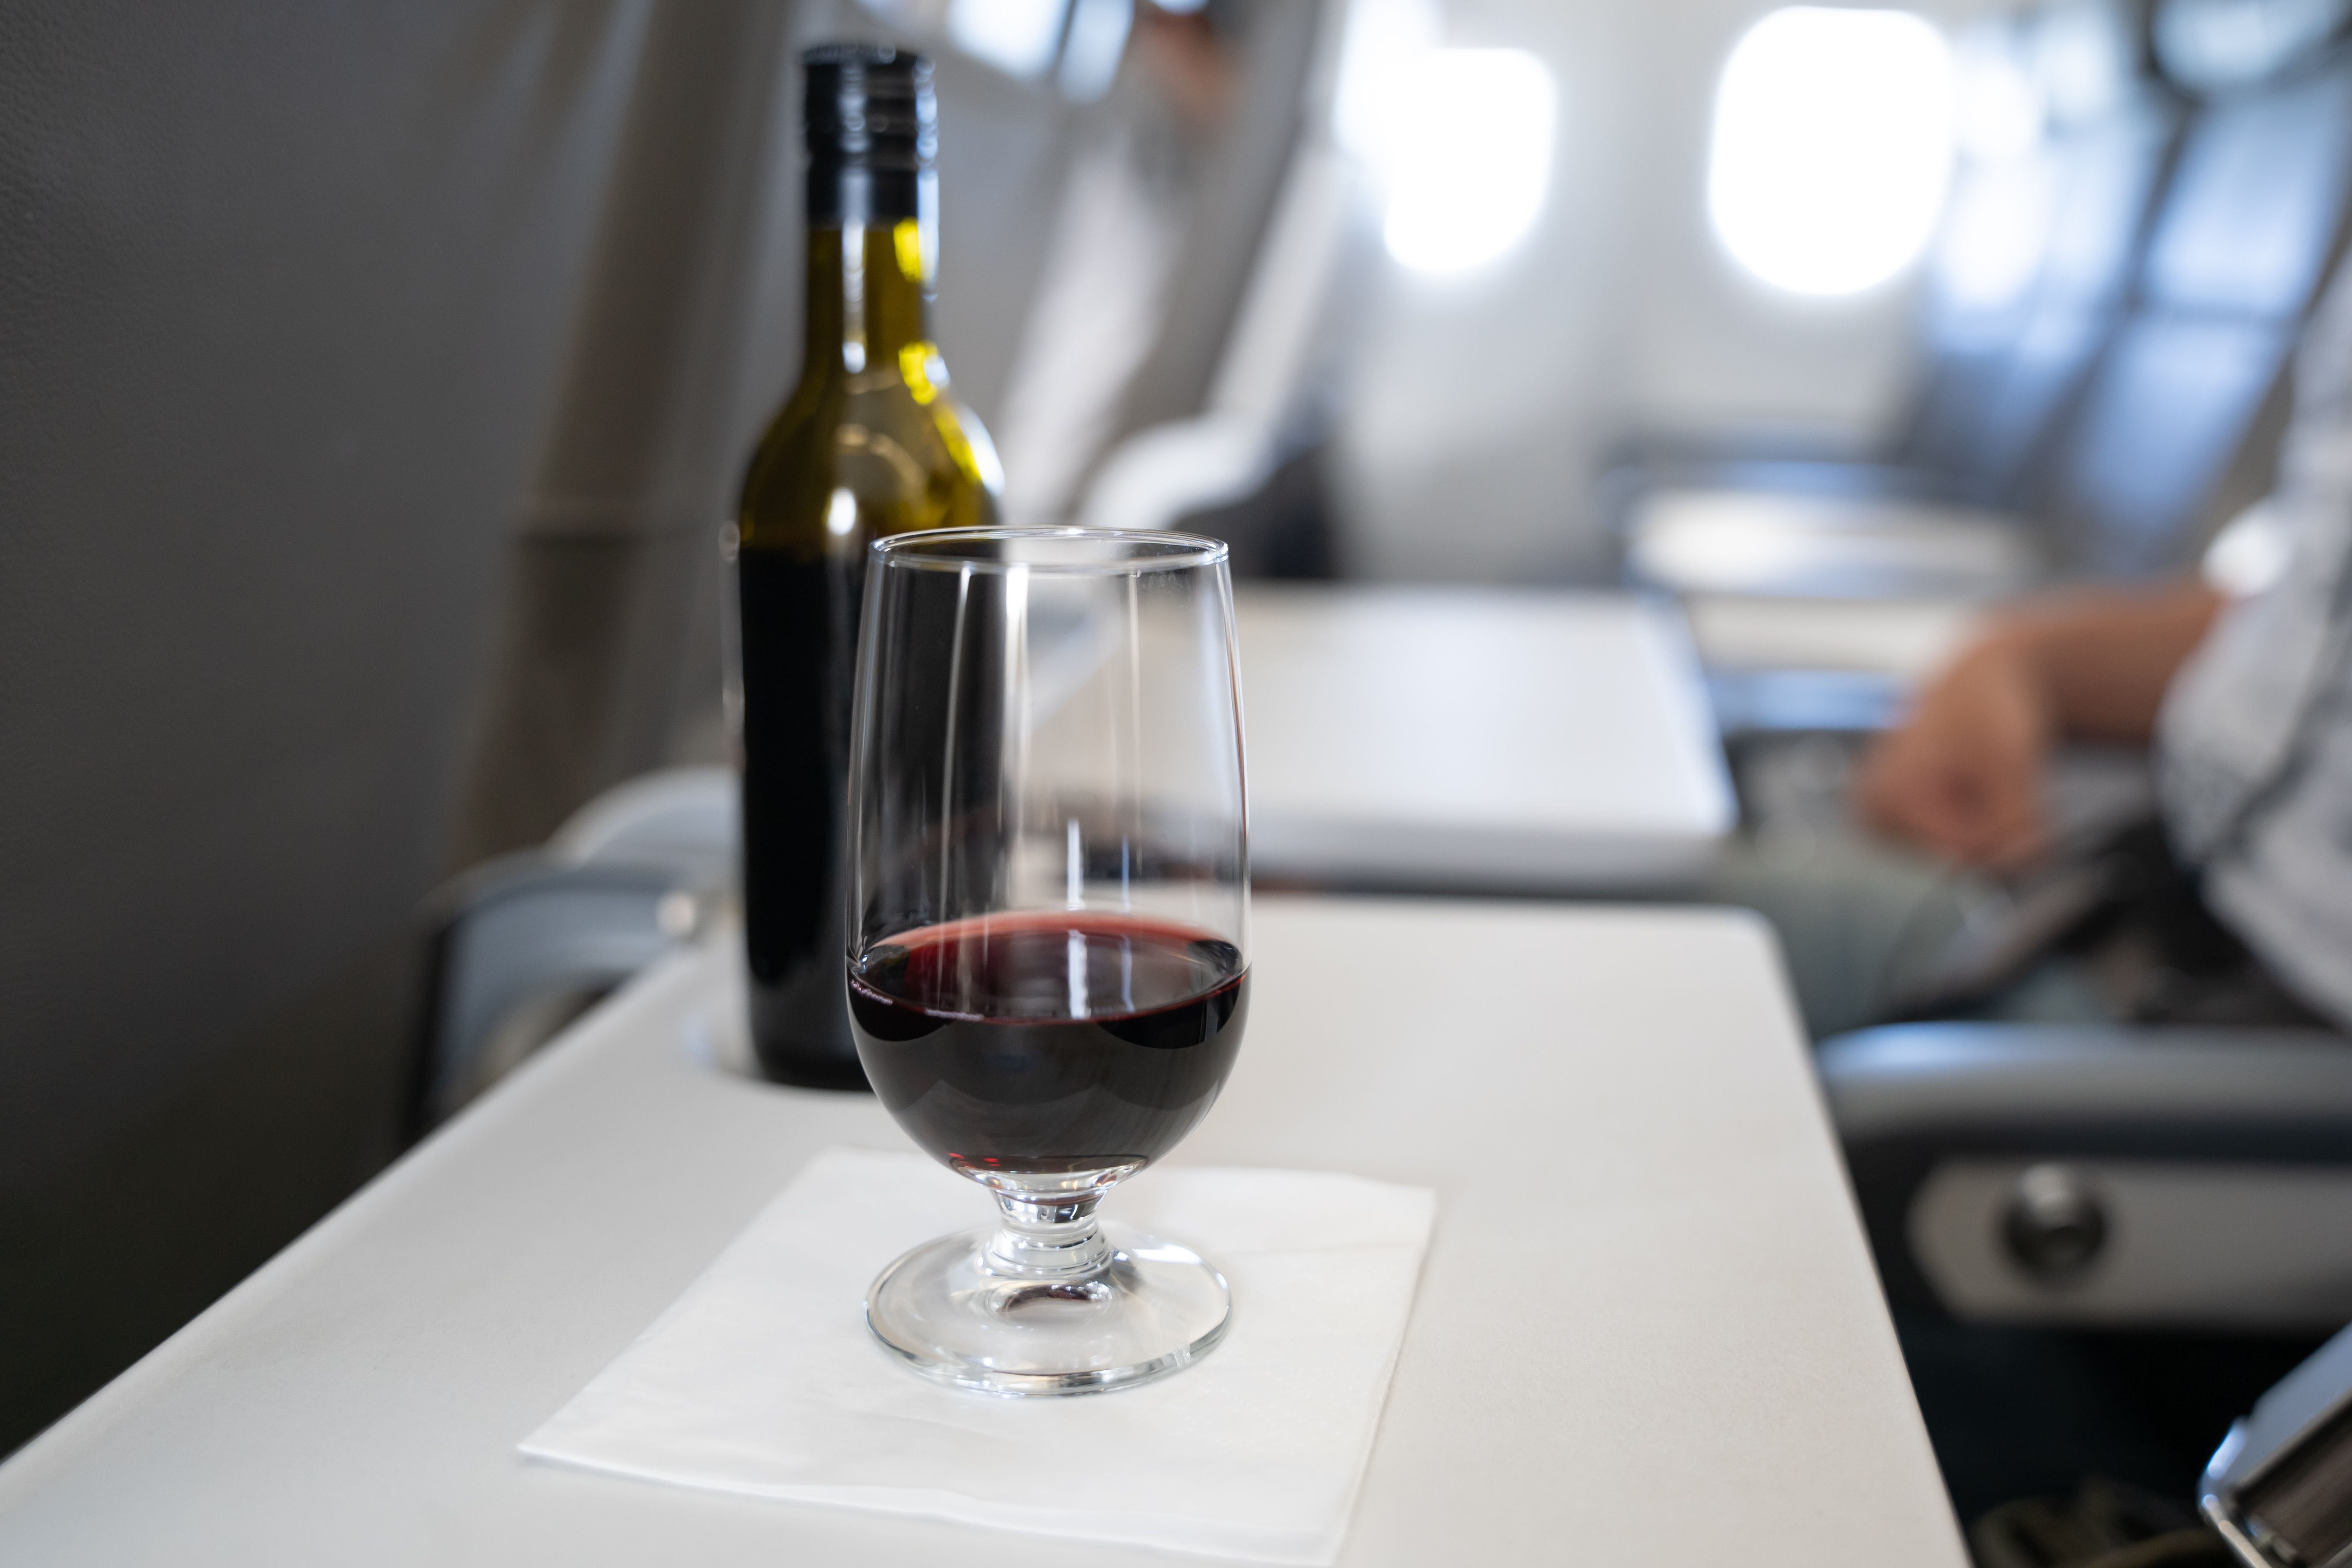 A glass of wine onboard an aircraft